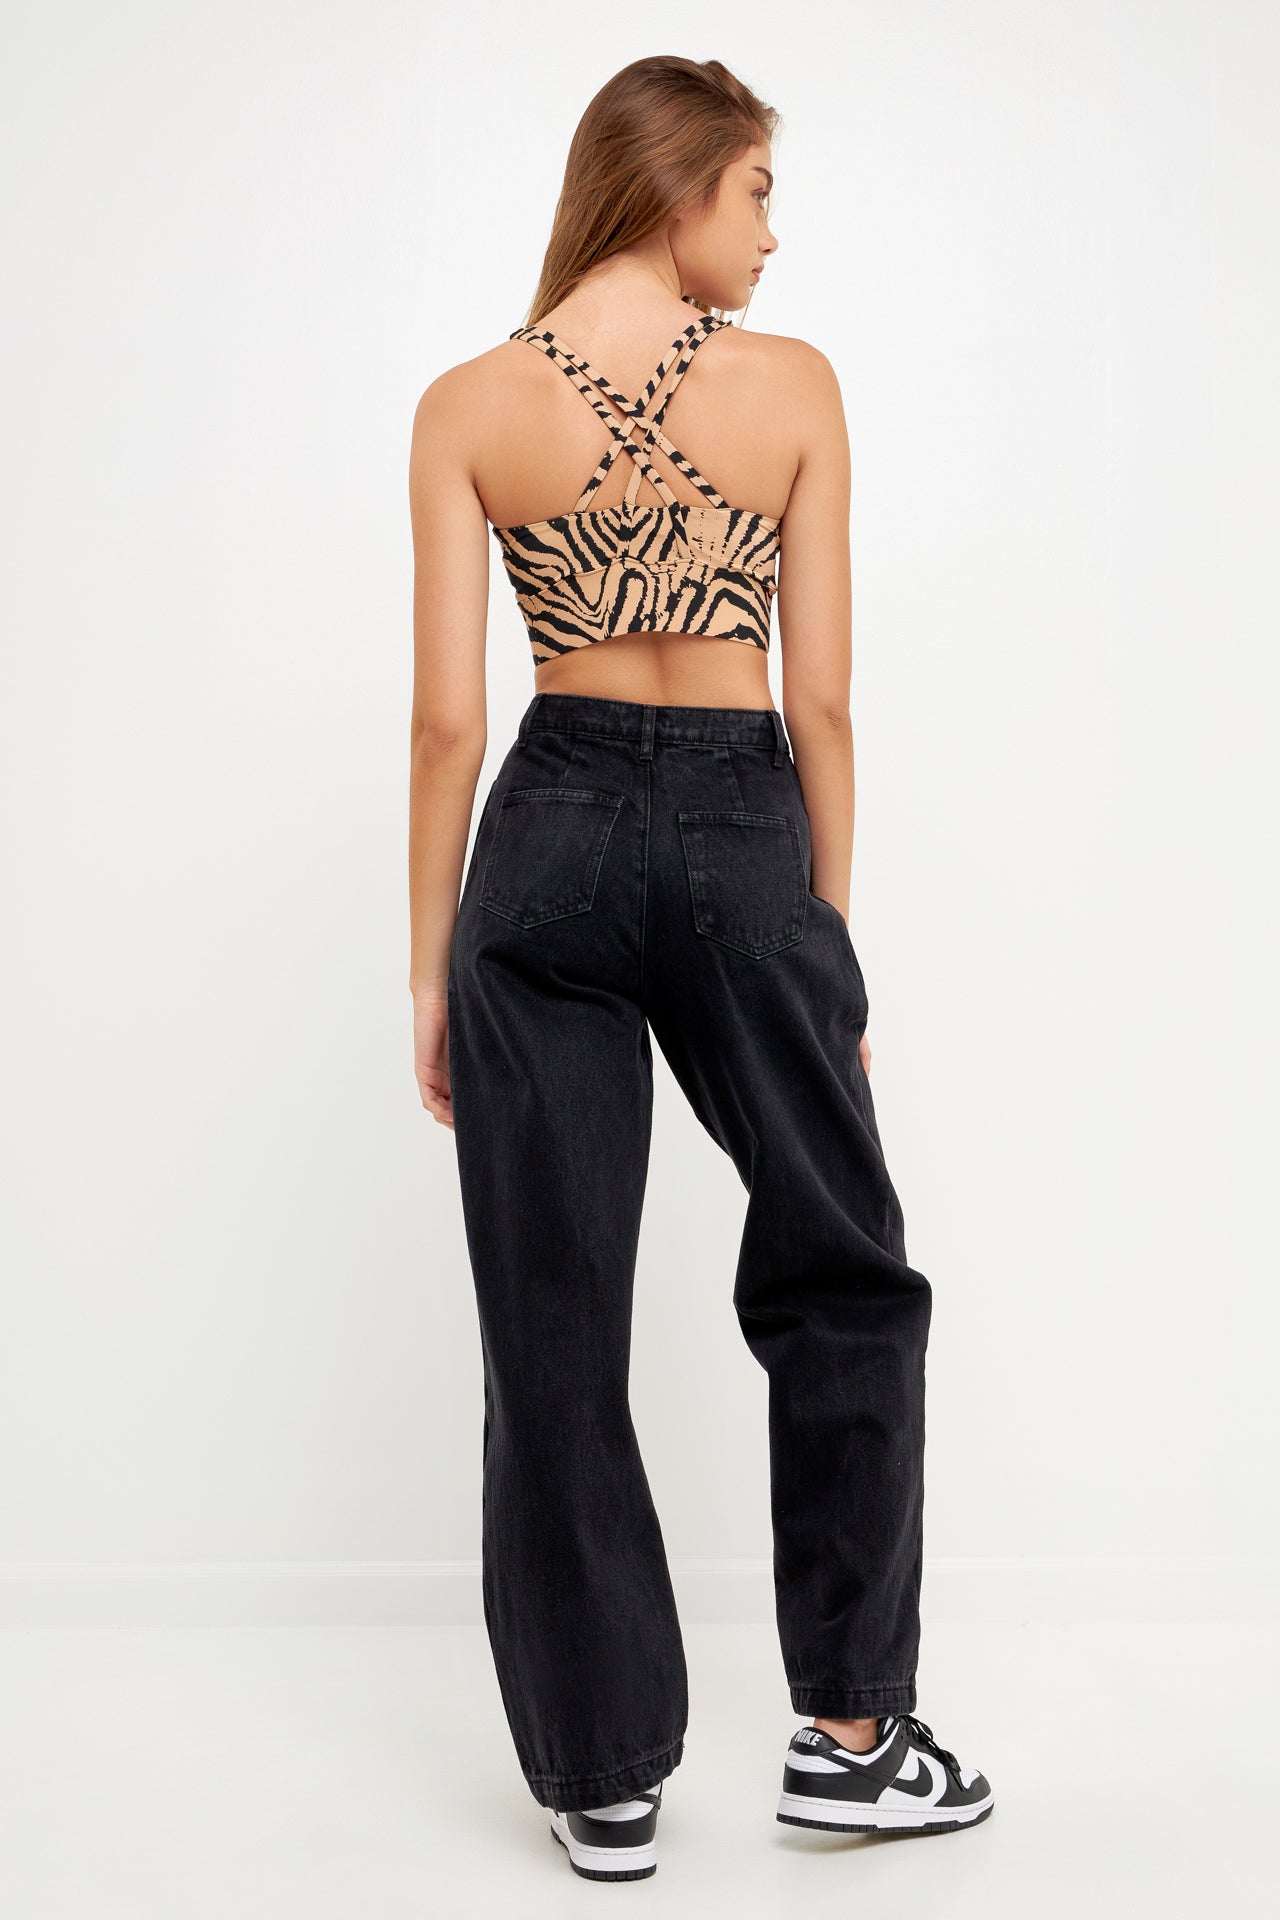 GREY LAB-Animal Print Top-TOPS available at Objectrare